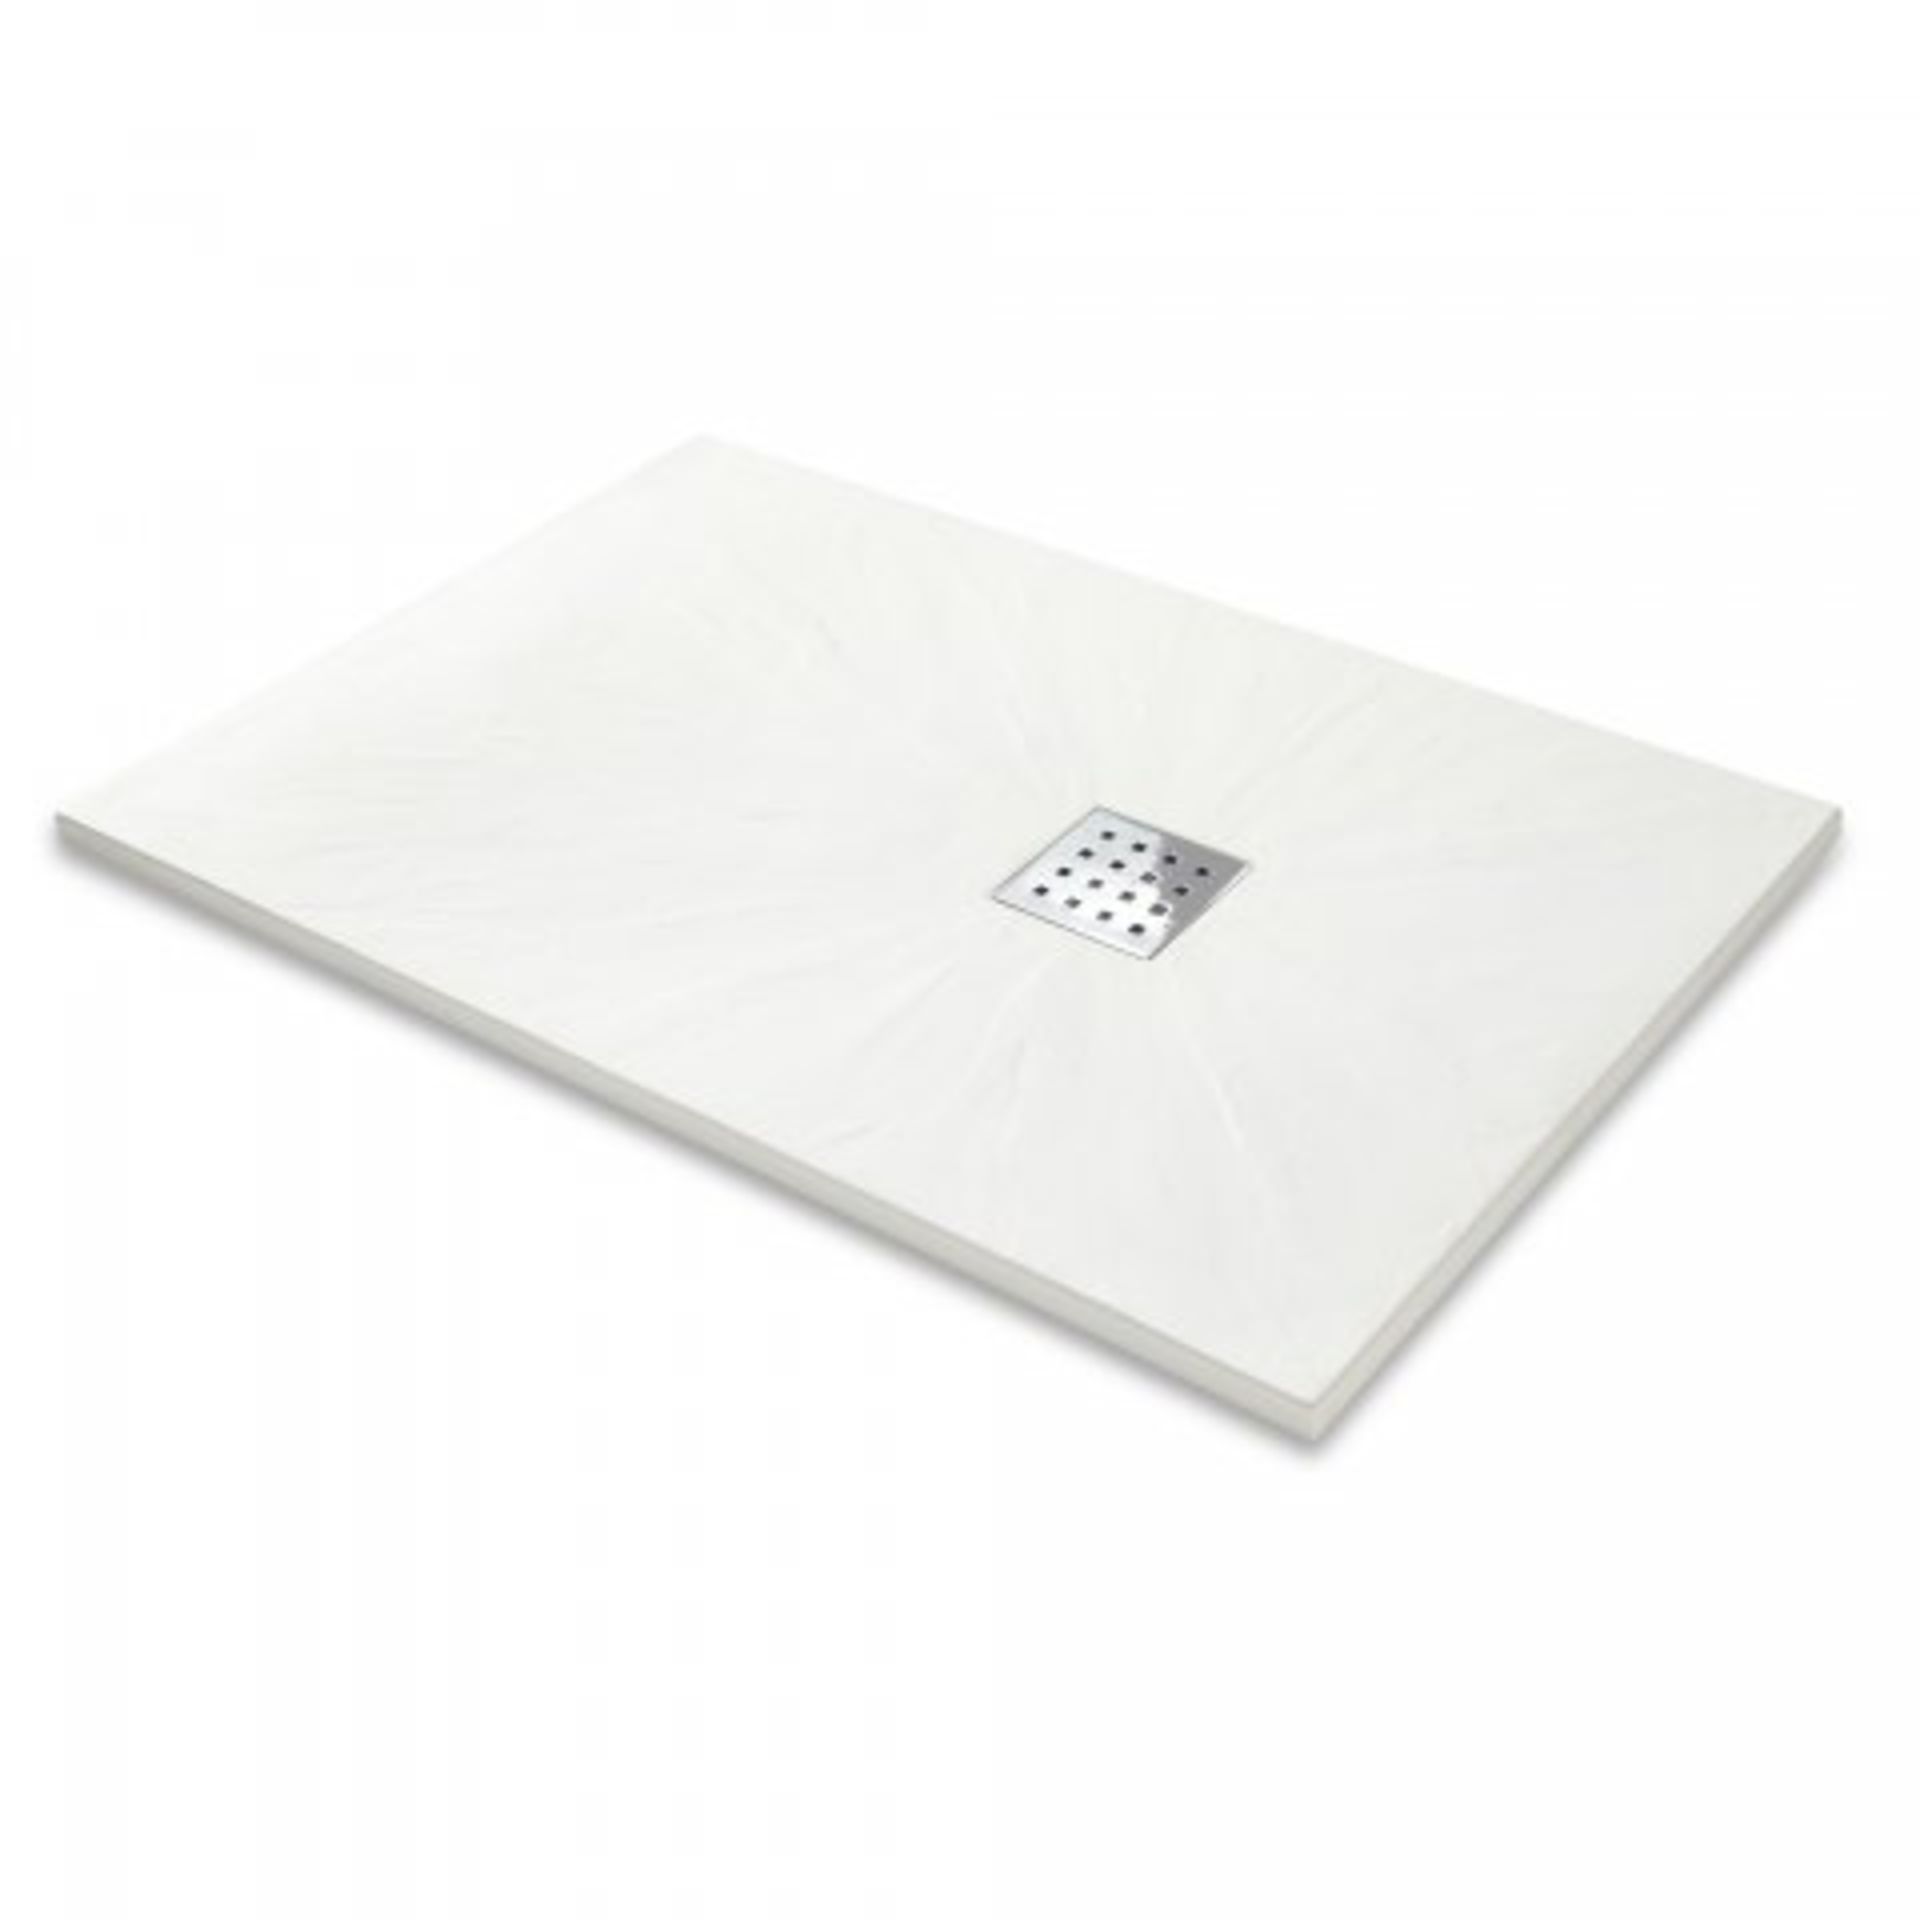 New & Boxed 1200x900 mm Rectangular White Slate Effect Shower Tray RRP £499.99.Hand Crafted Fr... - Image 2 of 3